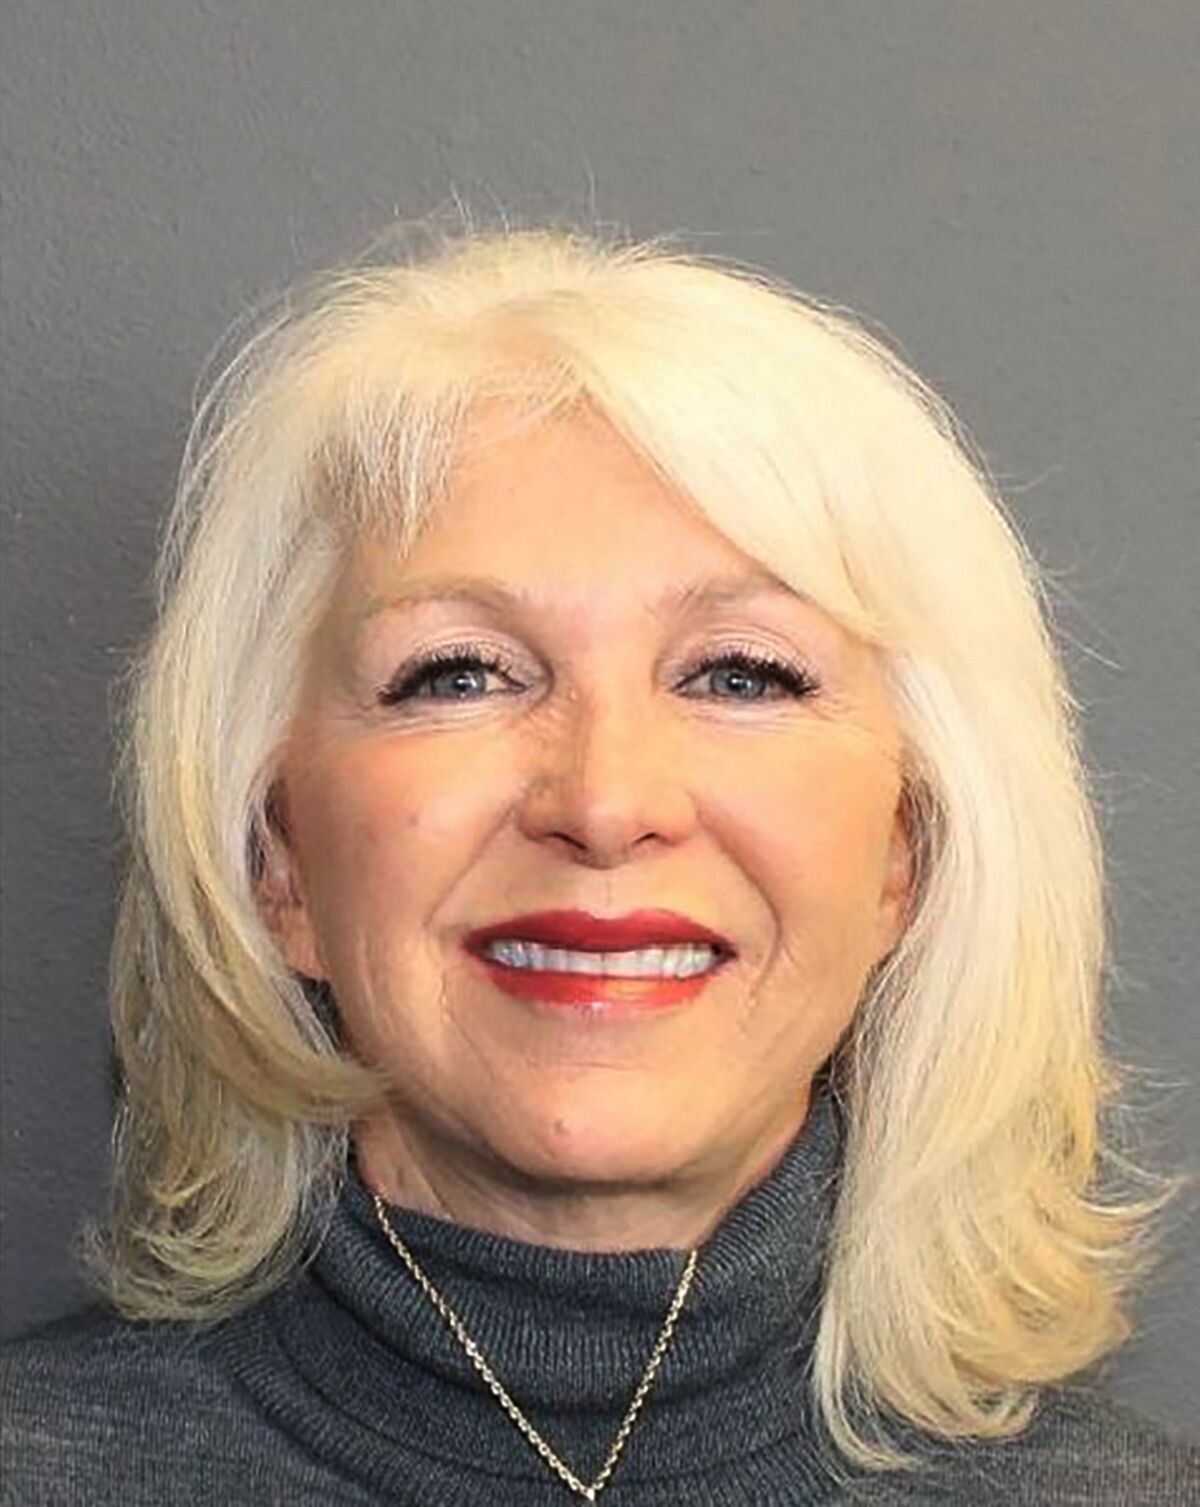 FILE - This booking photo provided by the Mesa County, Colo., Sheriff's Department, shows Mesa County clerk Tina Peters on Thursday, Feb. 10, 2022, in Grand Junction, Colo. Peters, who repeats former President Donald Trump's lies about the 2020 presidential contest and is under investigation for alleged election security breaches, announced Monday, Feb. 14, 2022 that she is running to be her state's top elections officer. (Mesa County Sheriff's Department via AP, File)